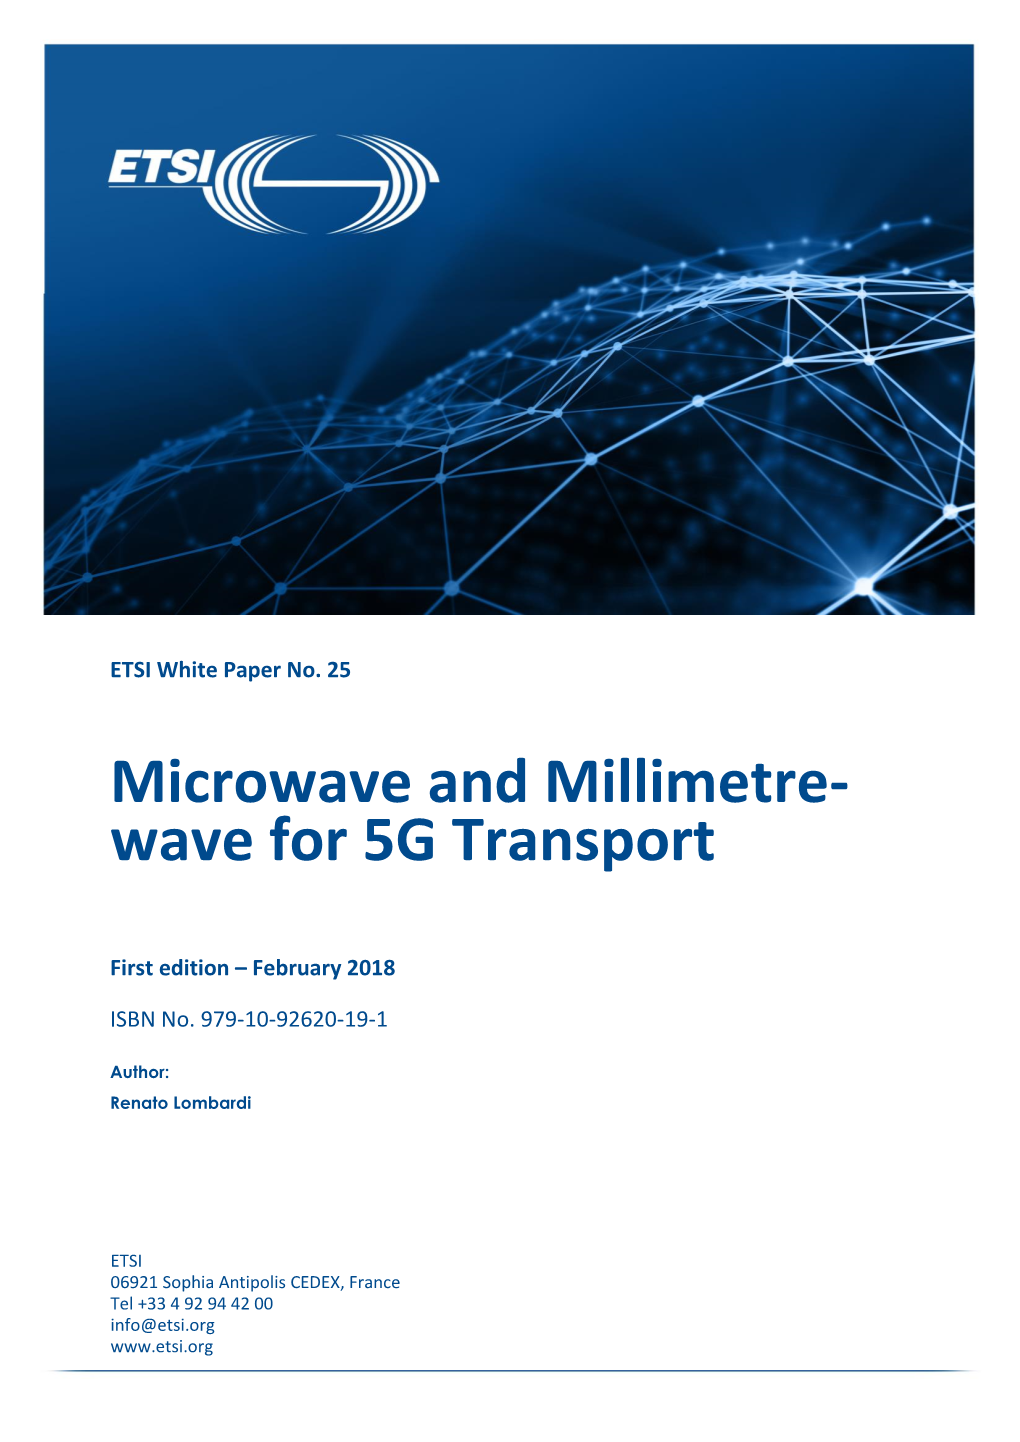 Microwave and Millimetre-Wave for 5G Transport